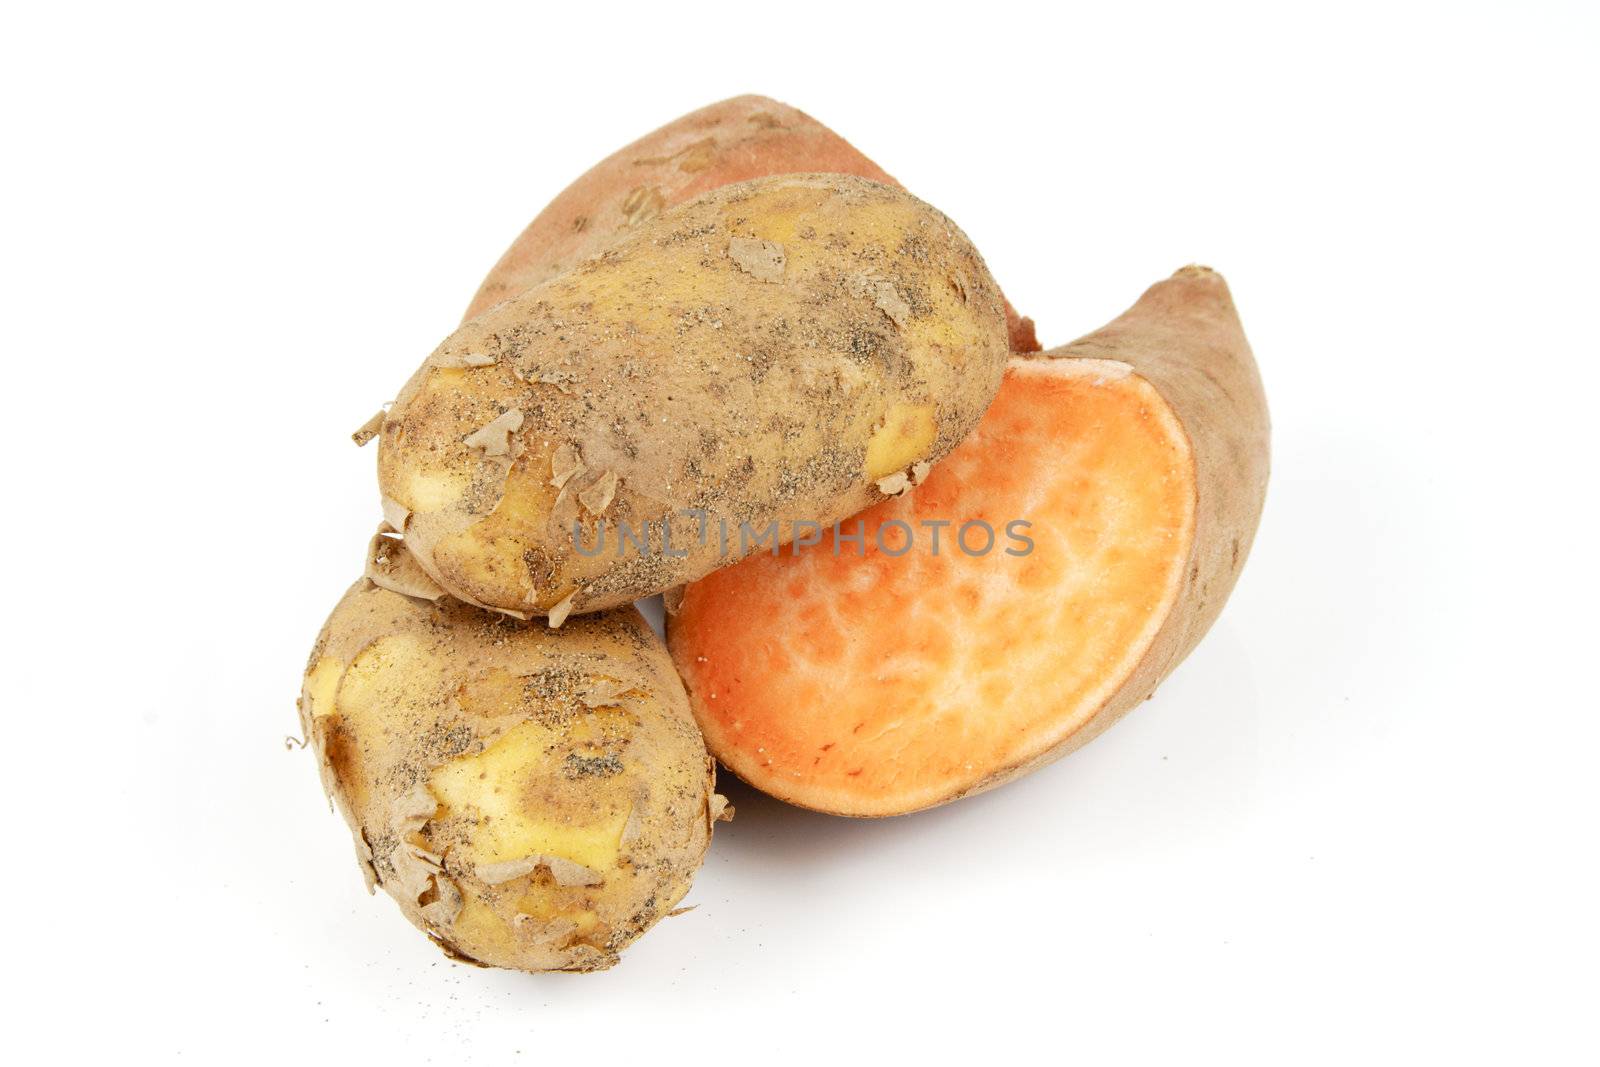 Sweet Potato cut in half with a small brown potato on a reflective white background